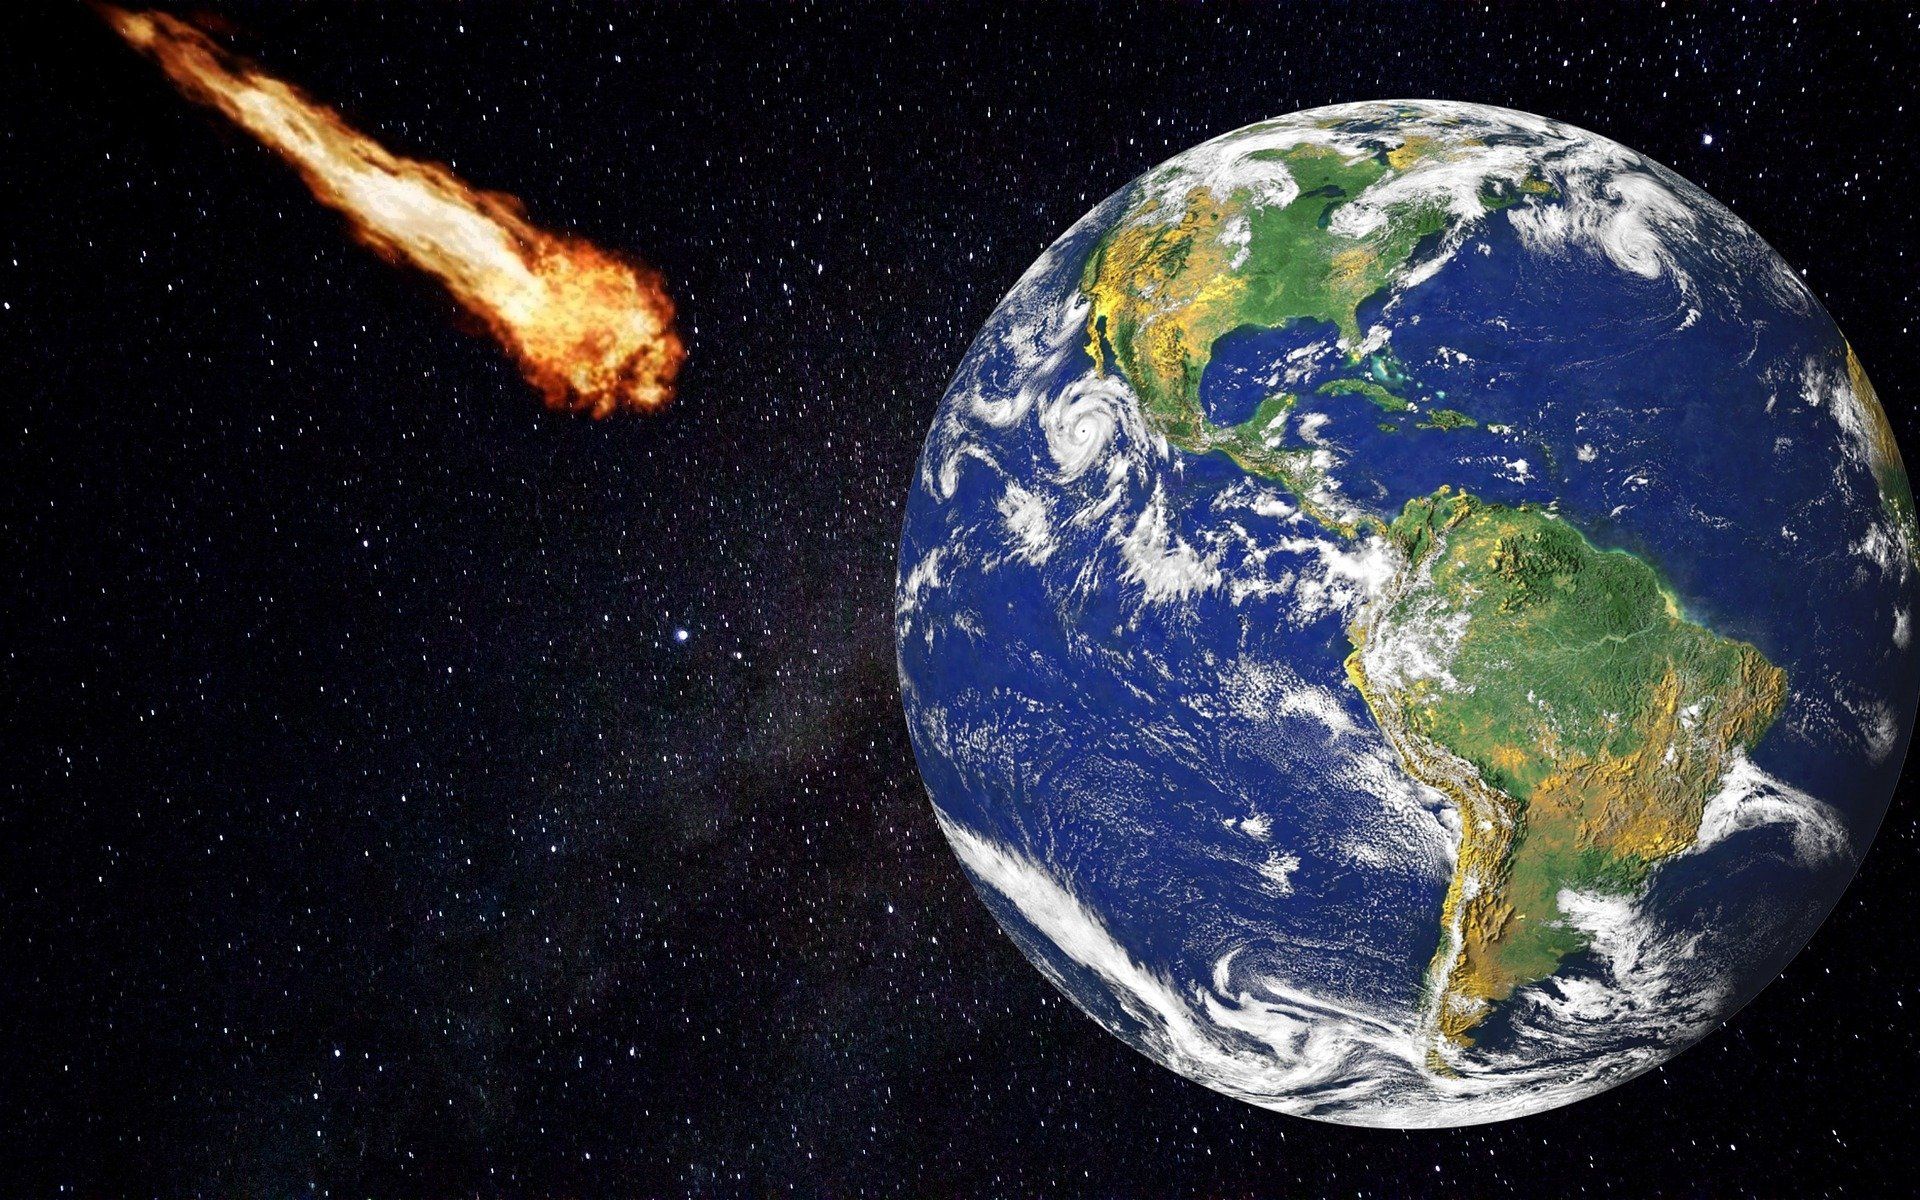 Just look up: Kilometre-wide asteroid to fly past Earth on January 18